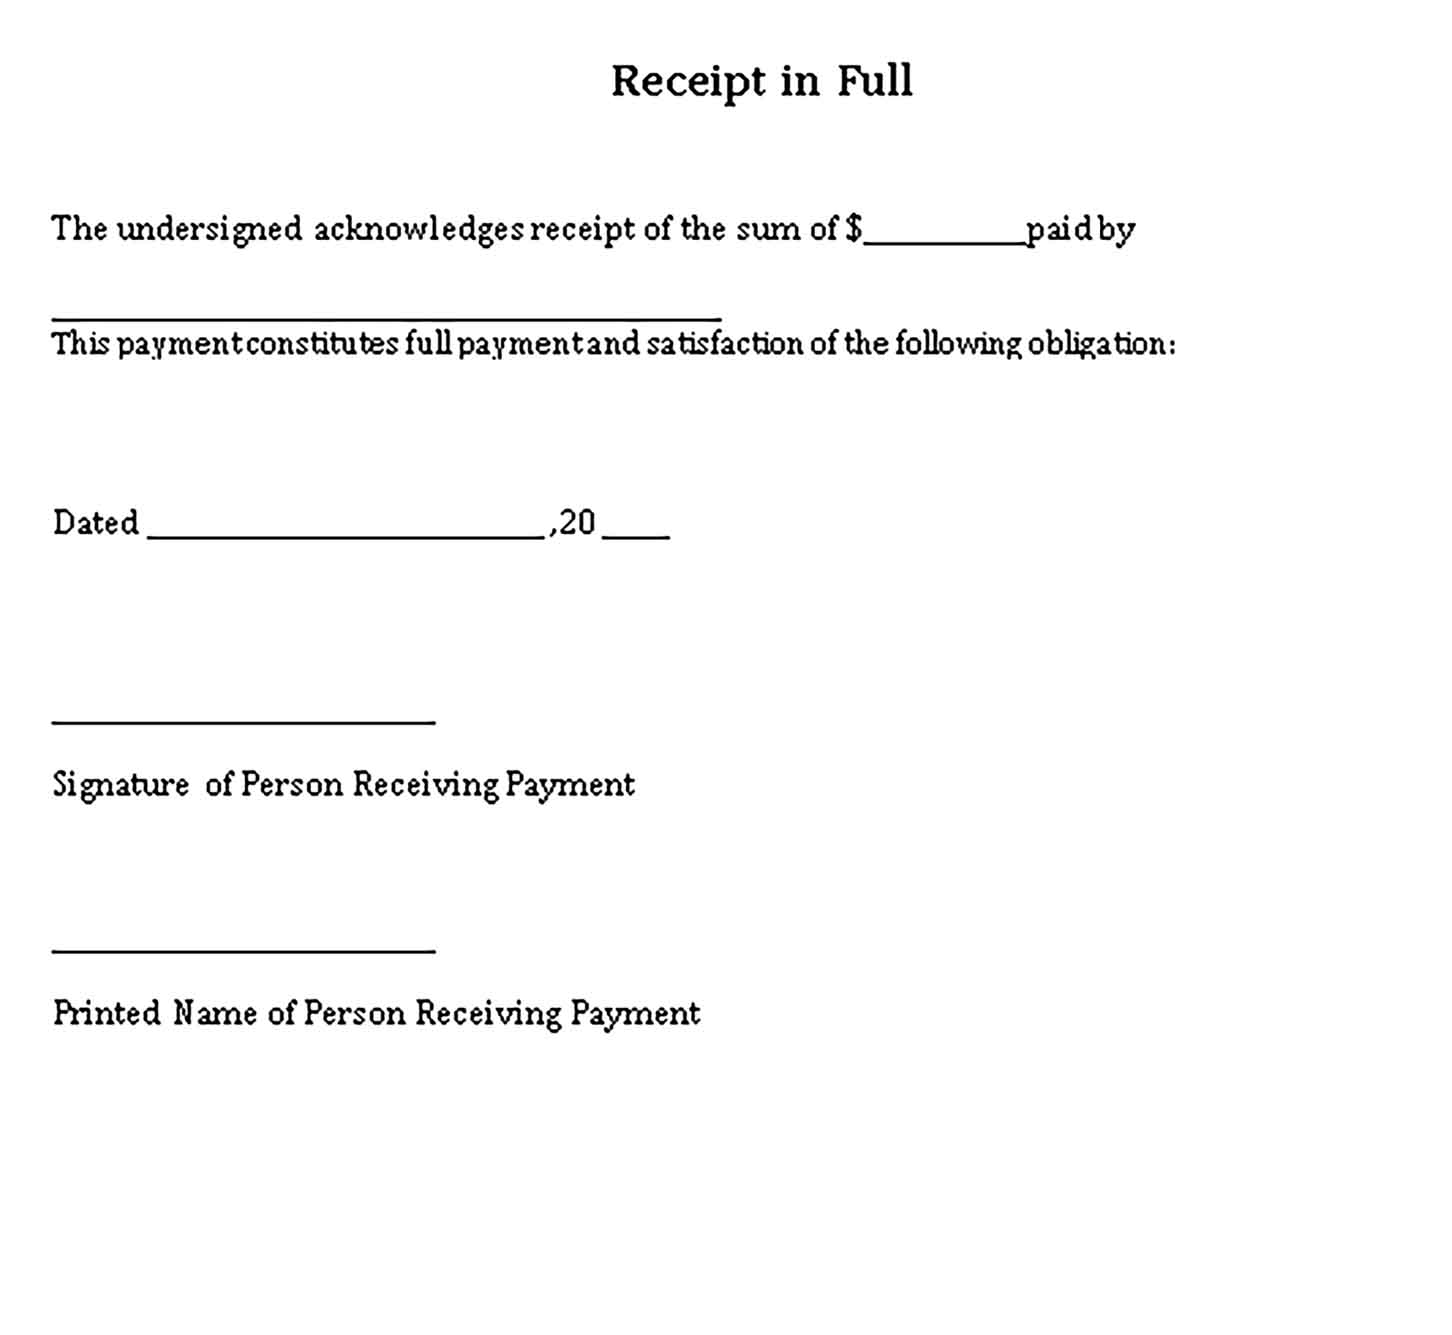 Sample Paid In Full Receipt Templates